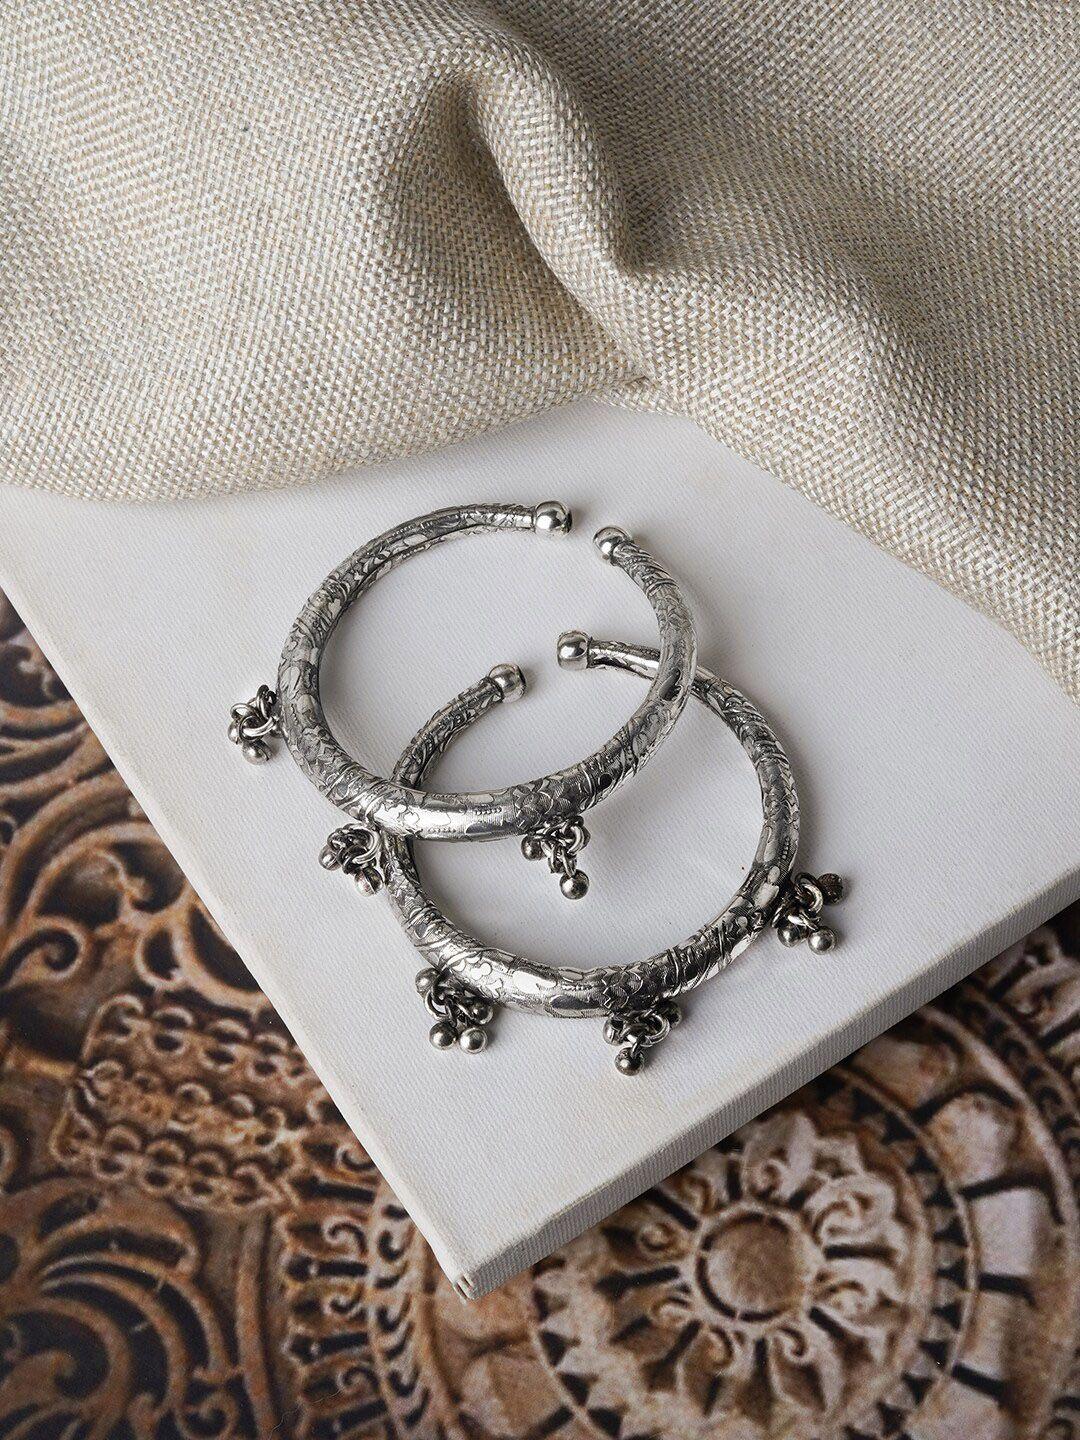 teejh bhanvi oxidized silver-plated anklets